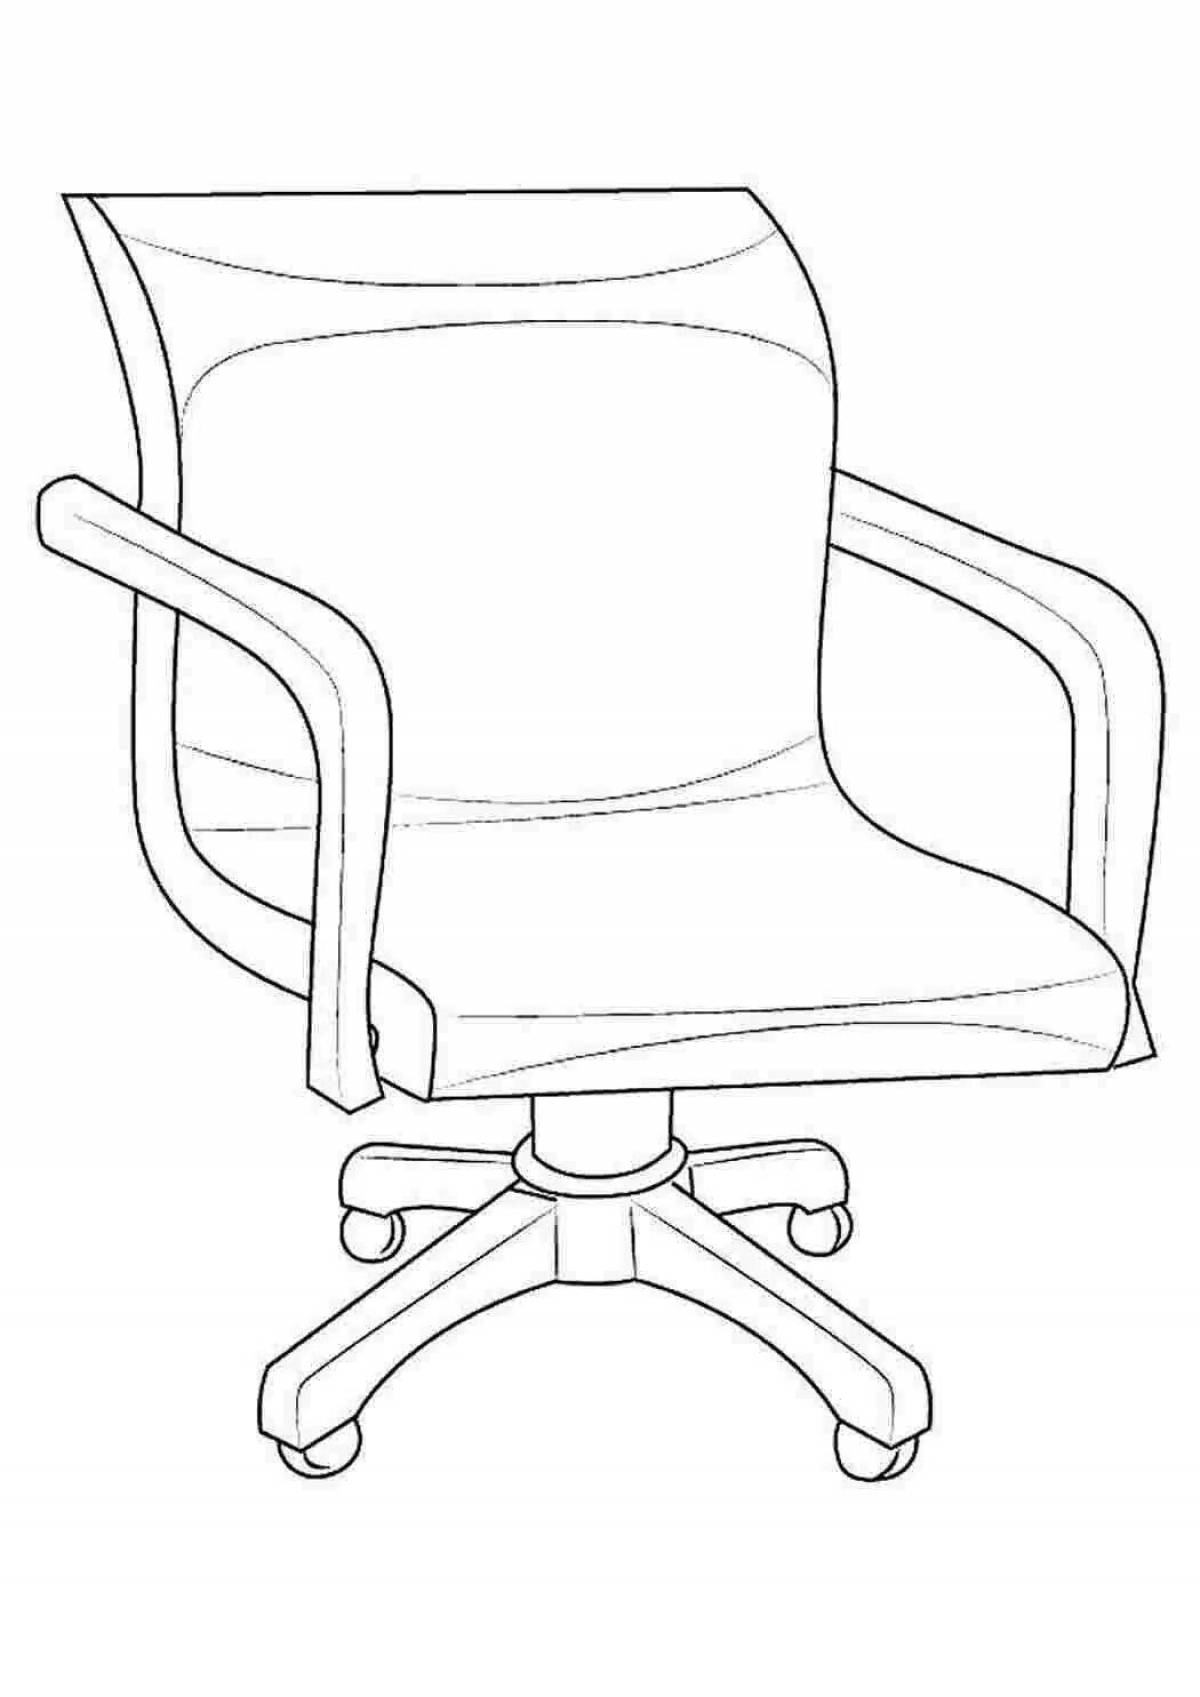 Coloring book cute chair for kids